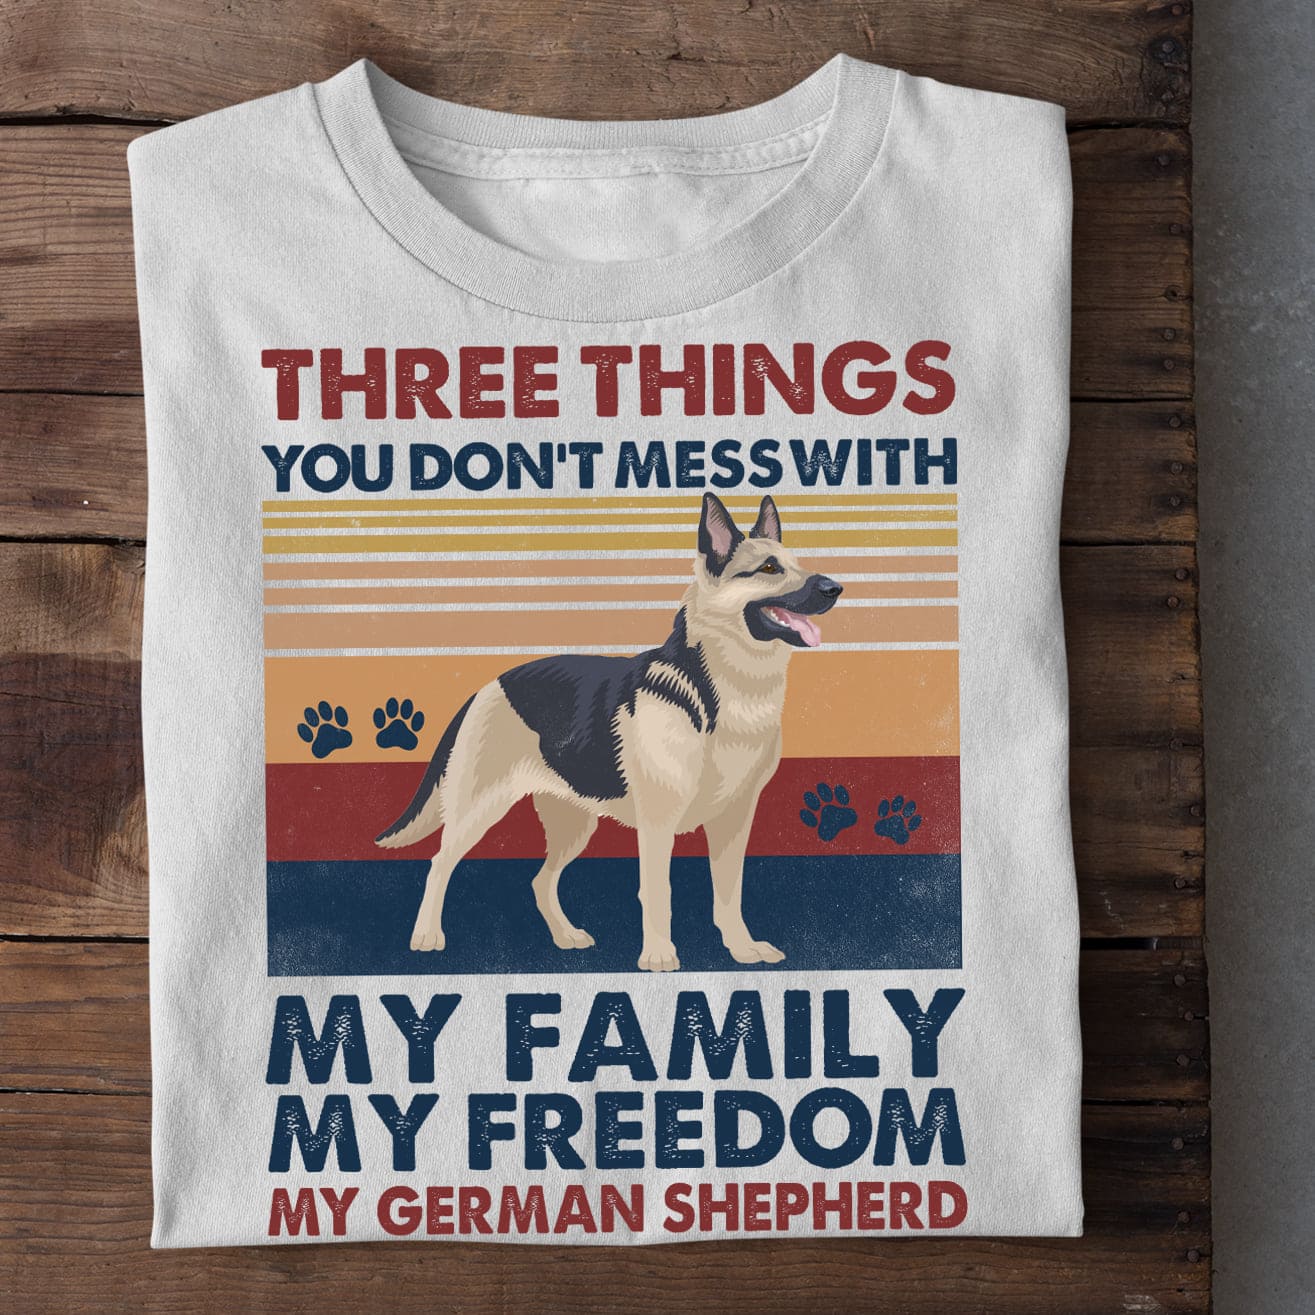 Three things you don't mess with - My family, my freedom, my German shepherd